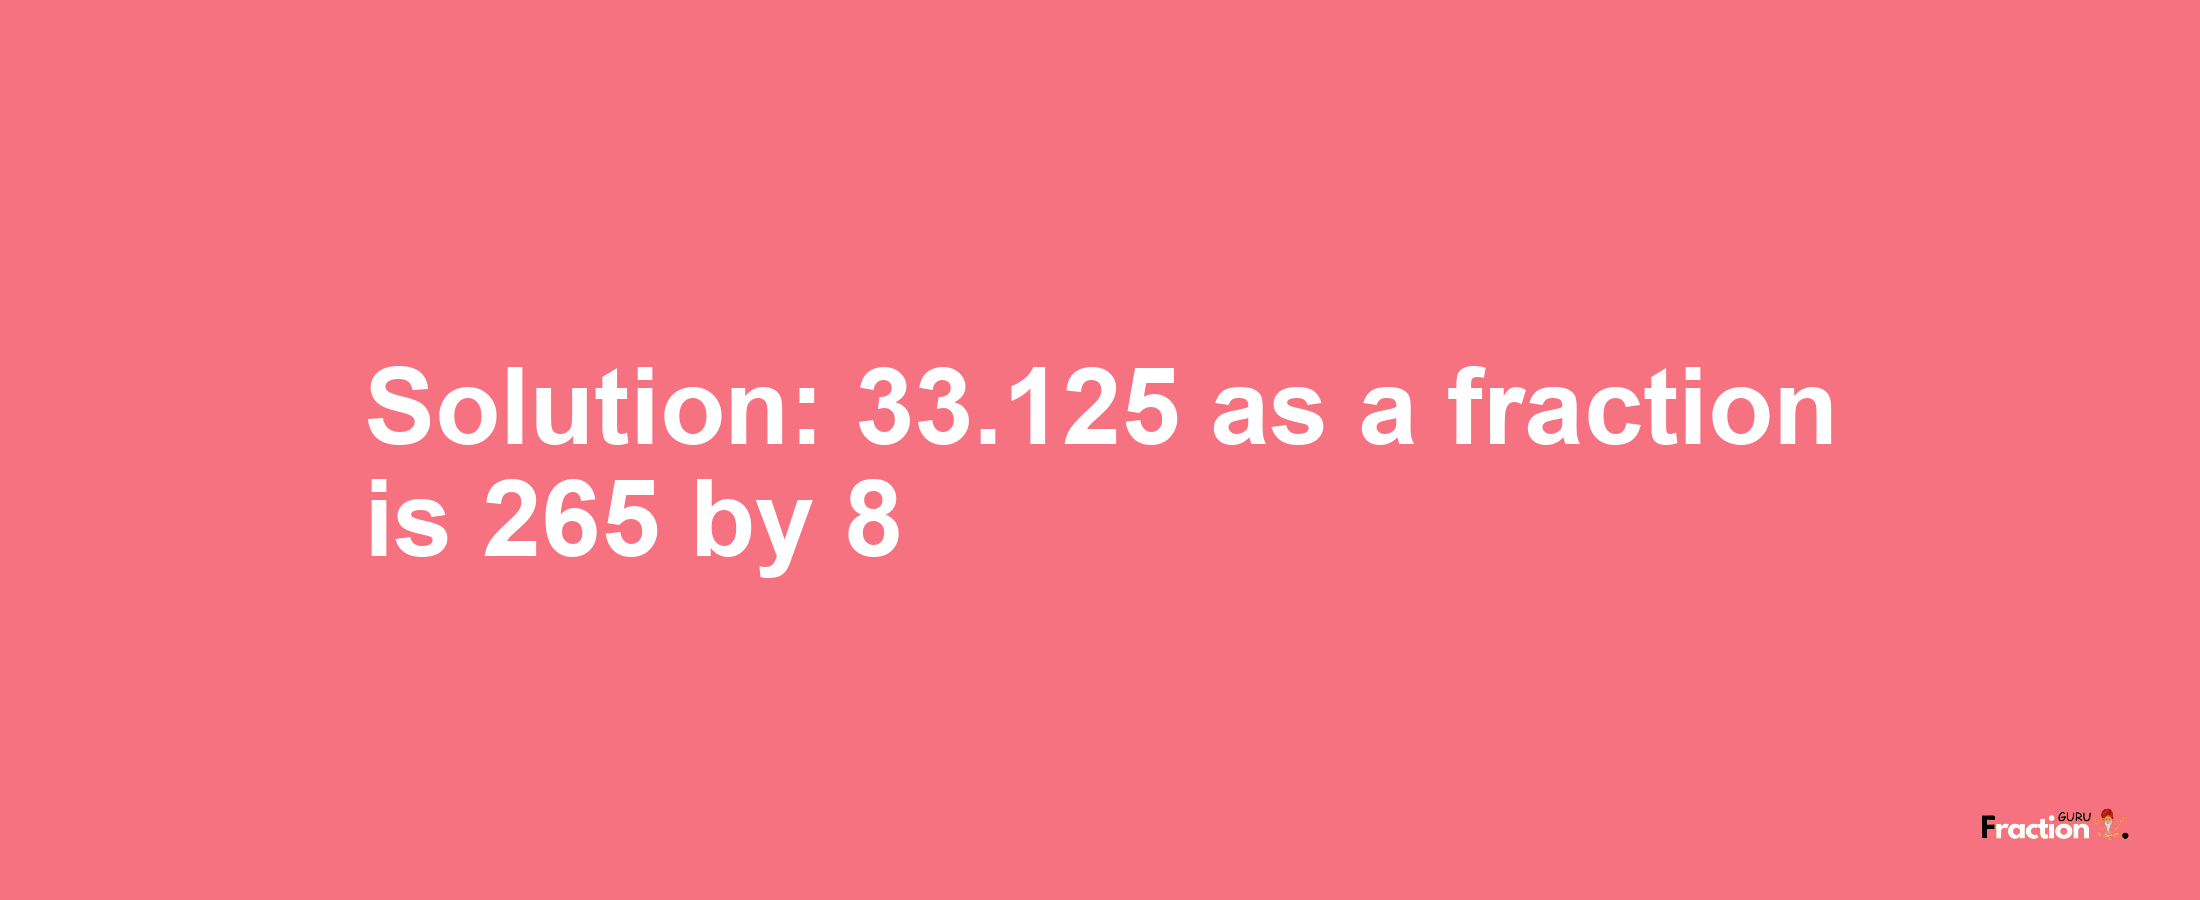 Solution:33.125 as a fraction is 265/8